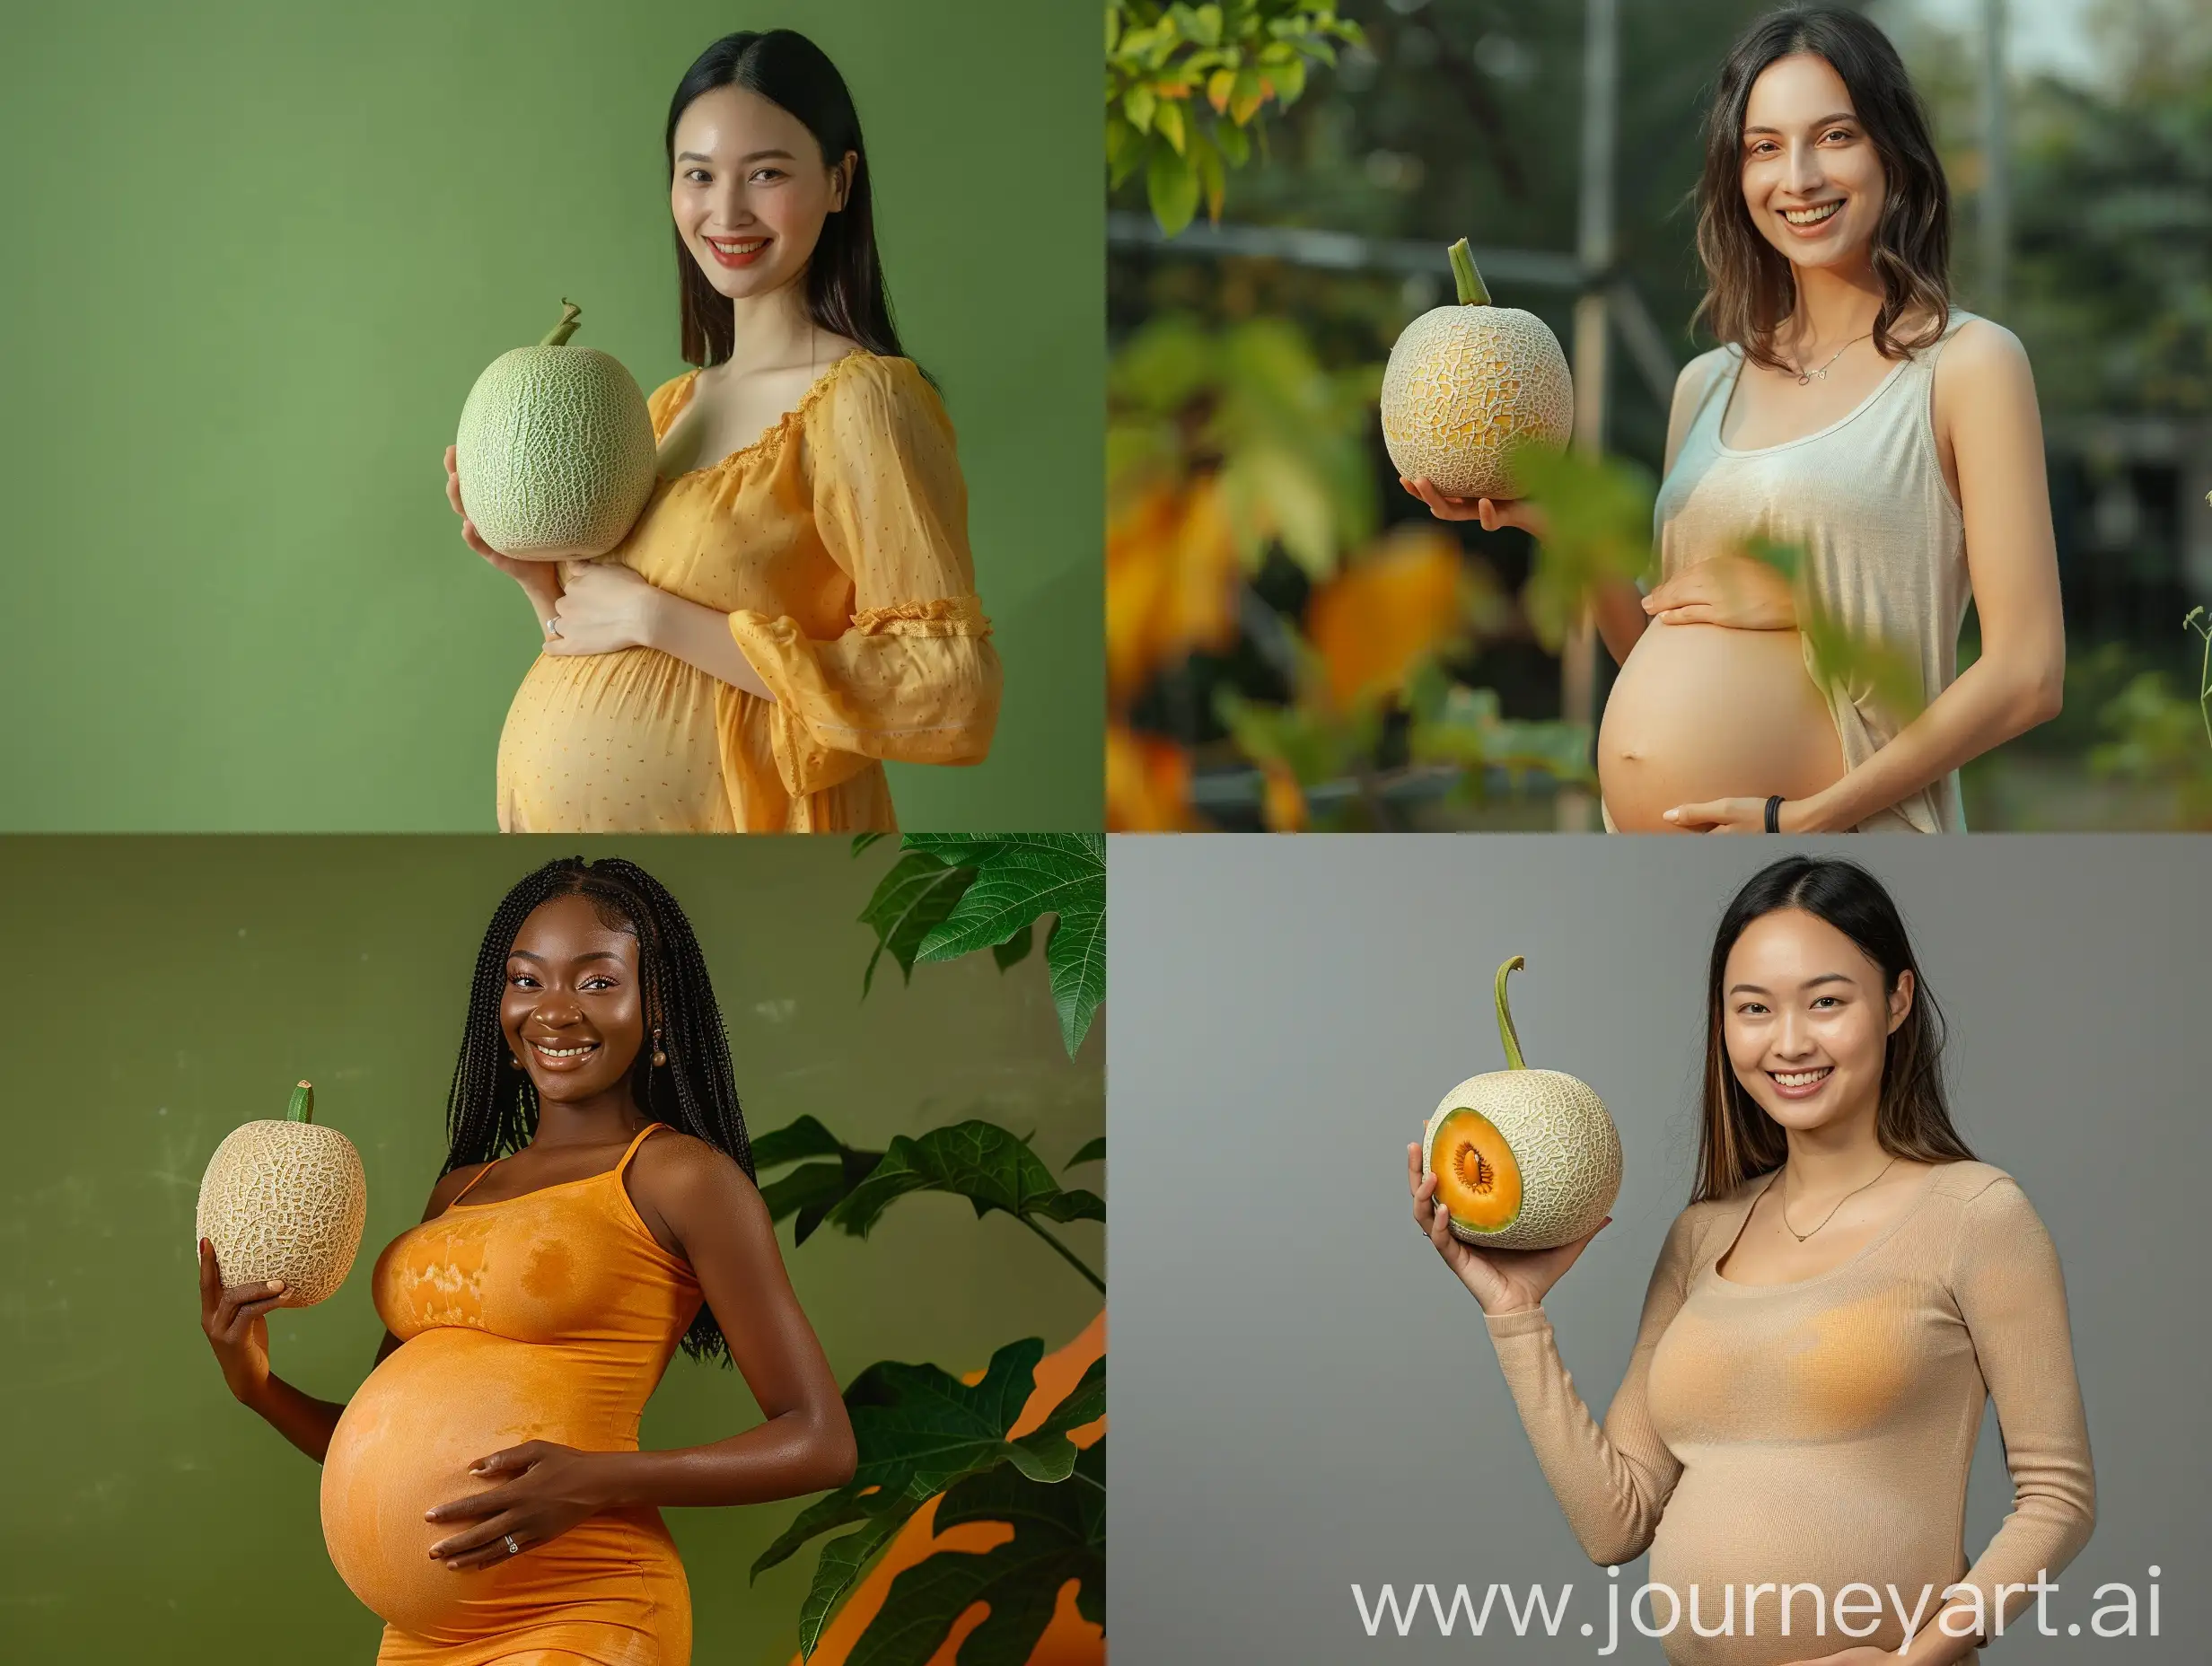 An attractive advertising photo of a pregnant woman holding a cantaloupe in her hand